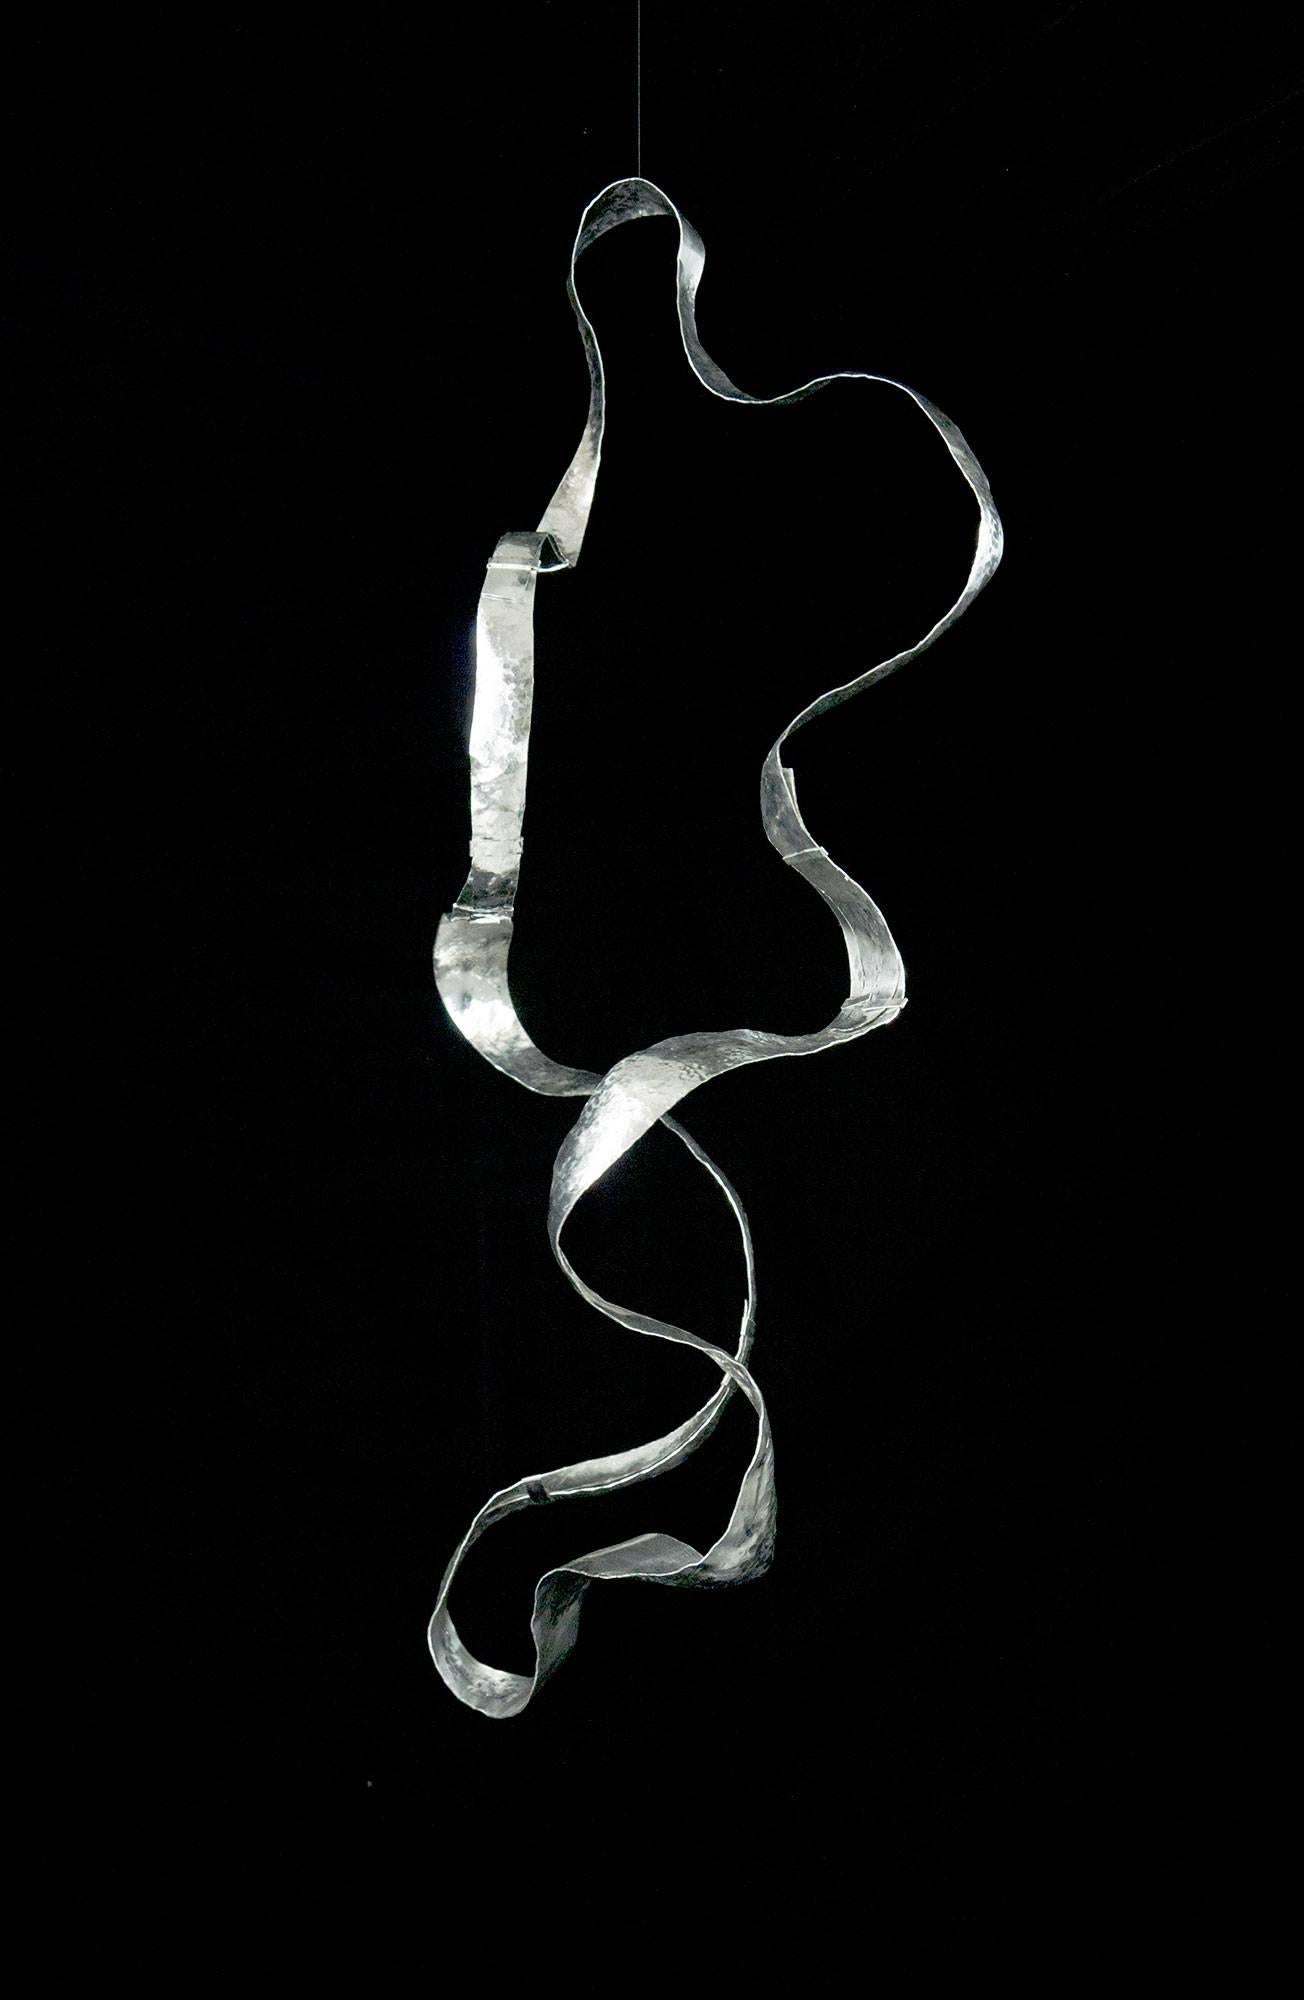 Jacques Jarrige Abstract Sculpture - Mobile Sculpture in hammered aluminum "Waves" 